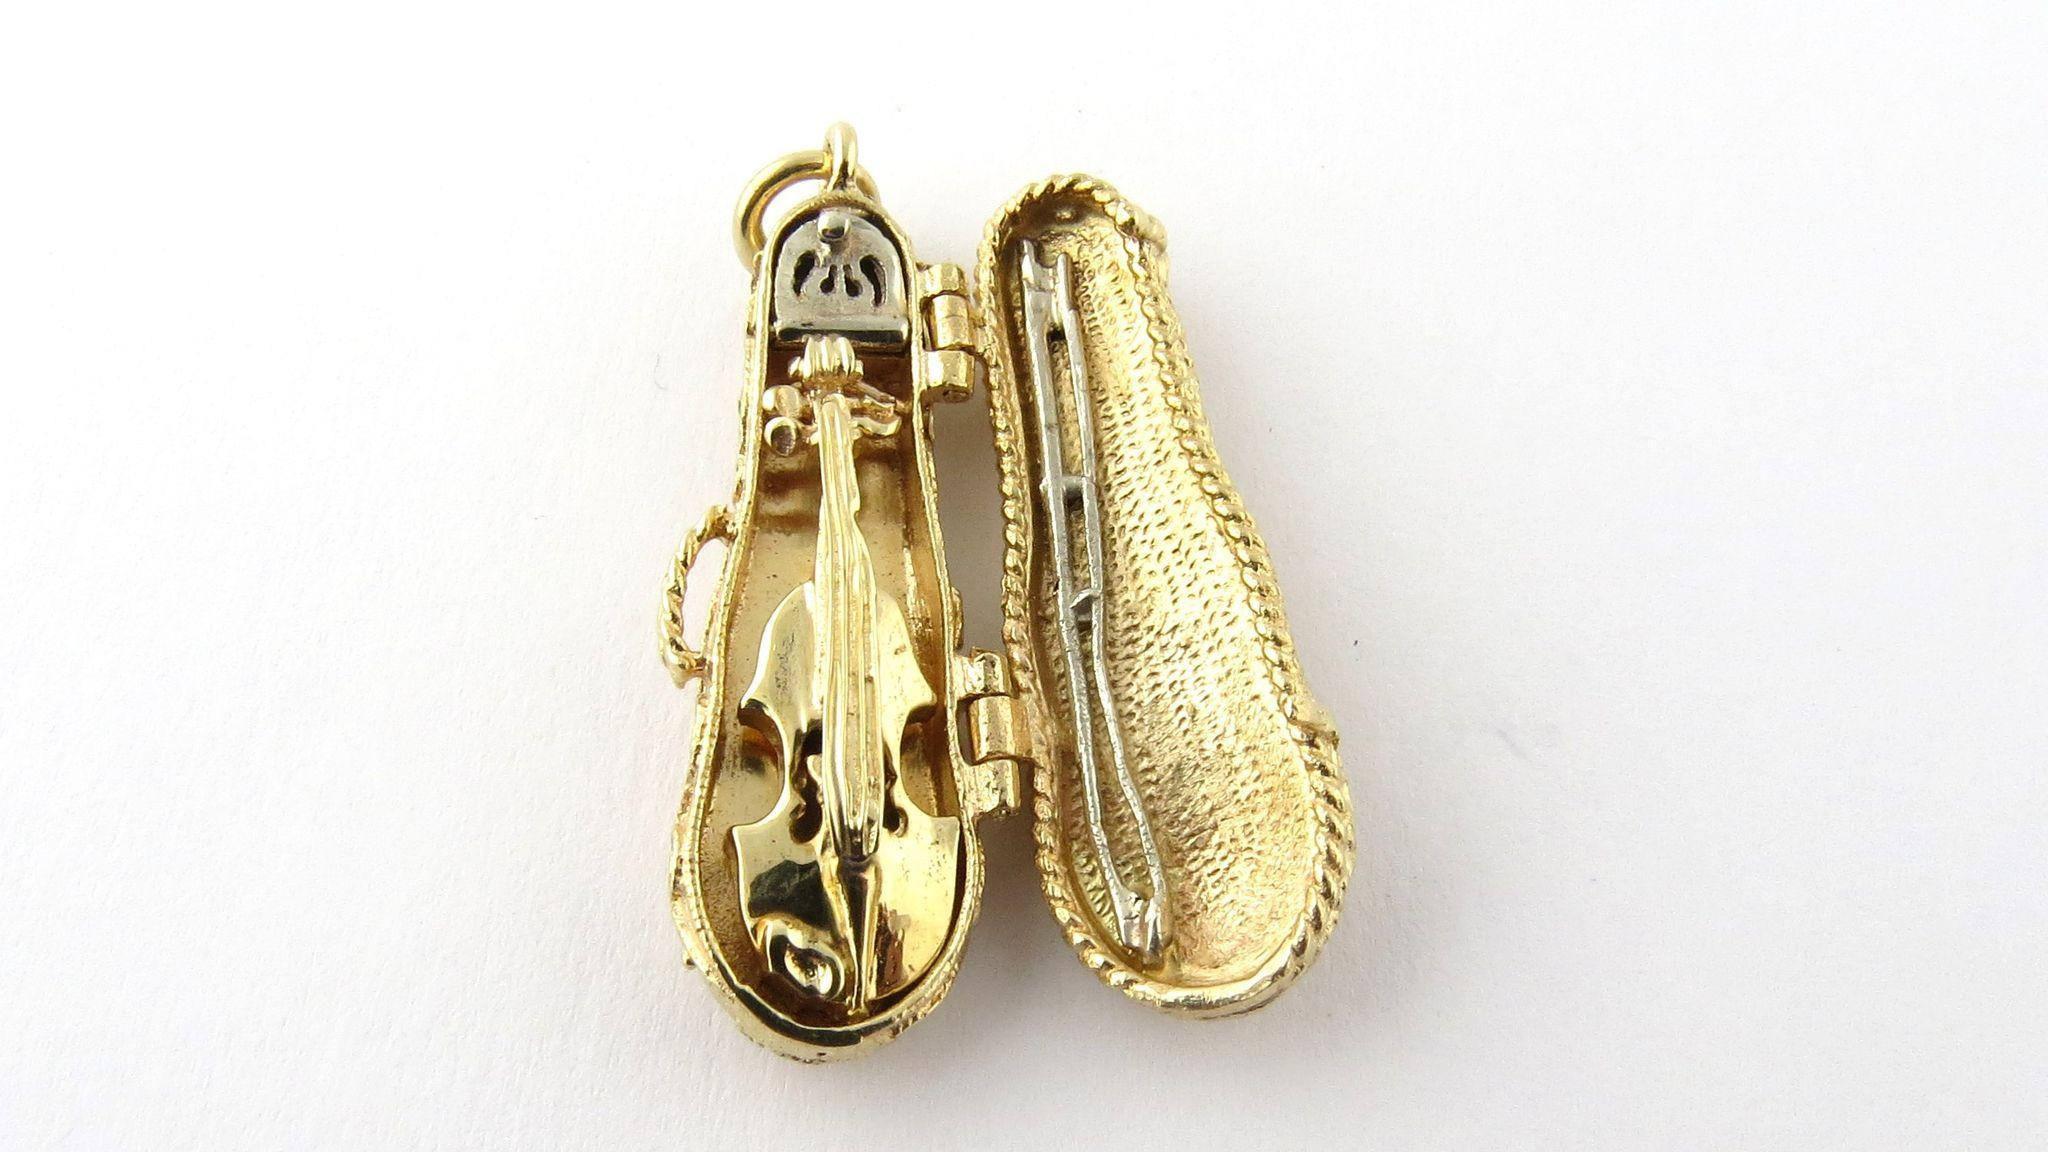 Vintage 14K Yellow Gold and Turquoise Violin Pendant / Charm in Violin Case with Bow 

38 mm in length from top of bale About 9 mm thick and 11mm wide

Beautiful scrolling design on case including 5 small turquoise stones. 

Inside the case is a